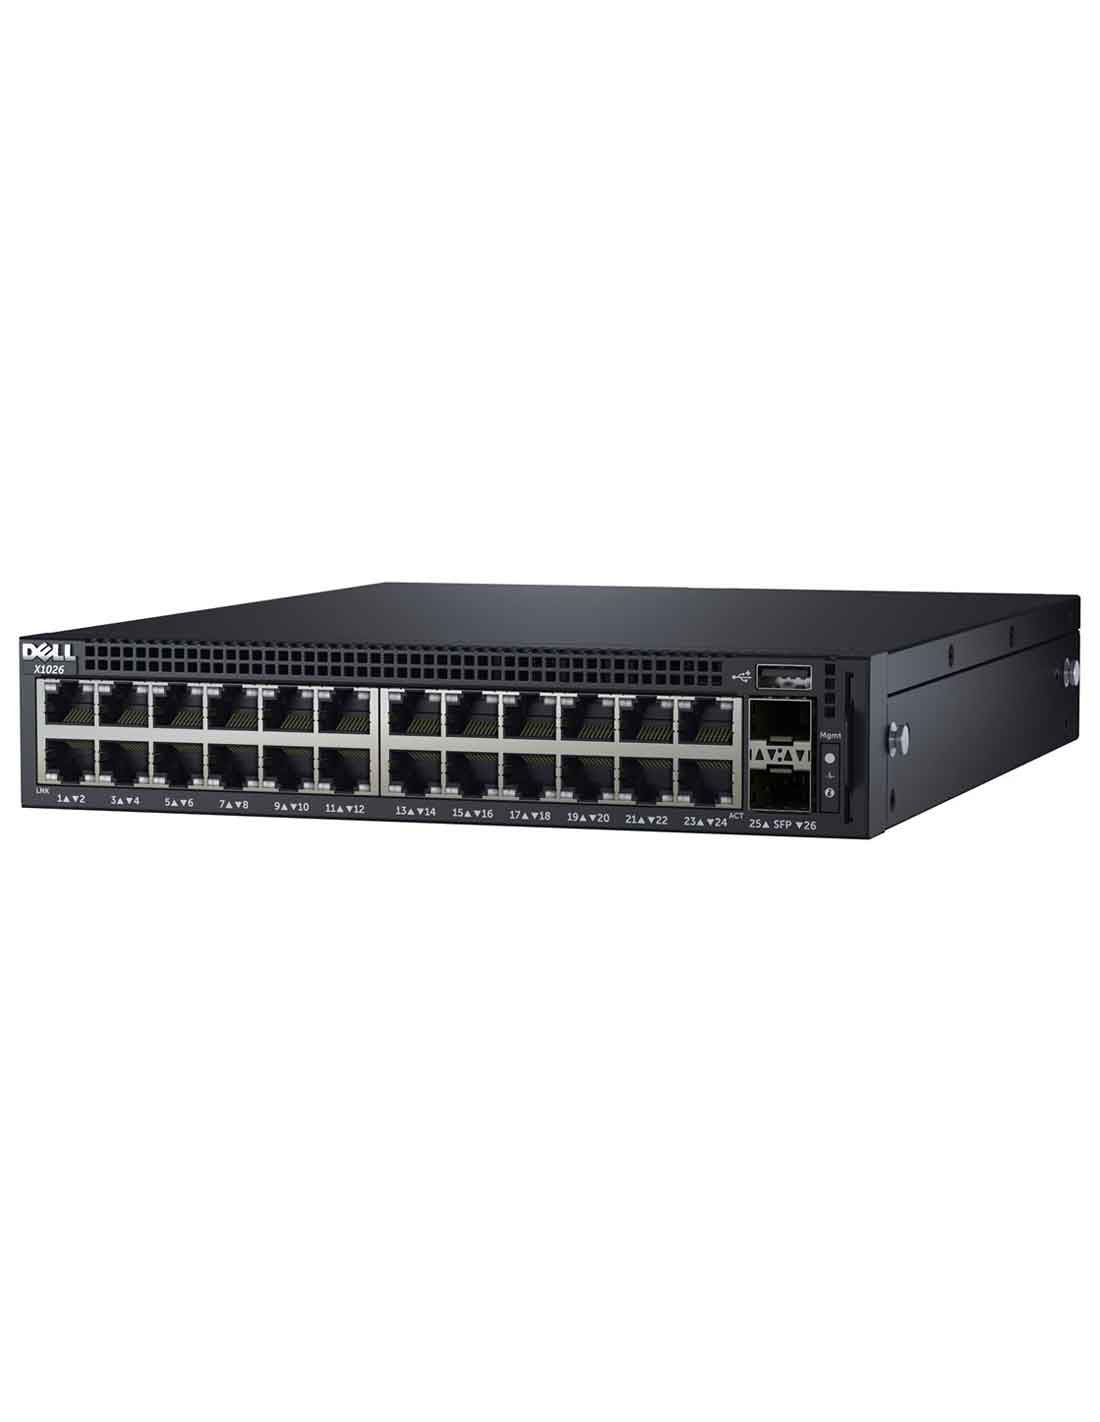 Dell Networking X1026P Managed Switch at a cheap price and fast free delivery in Dubai